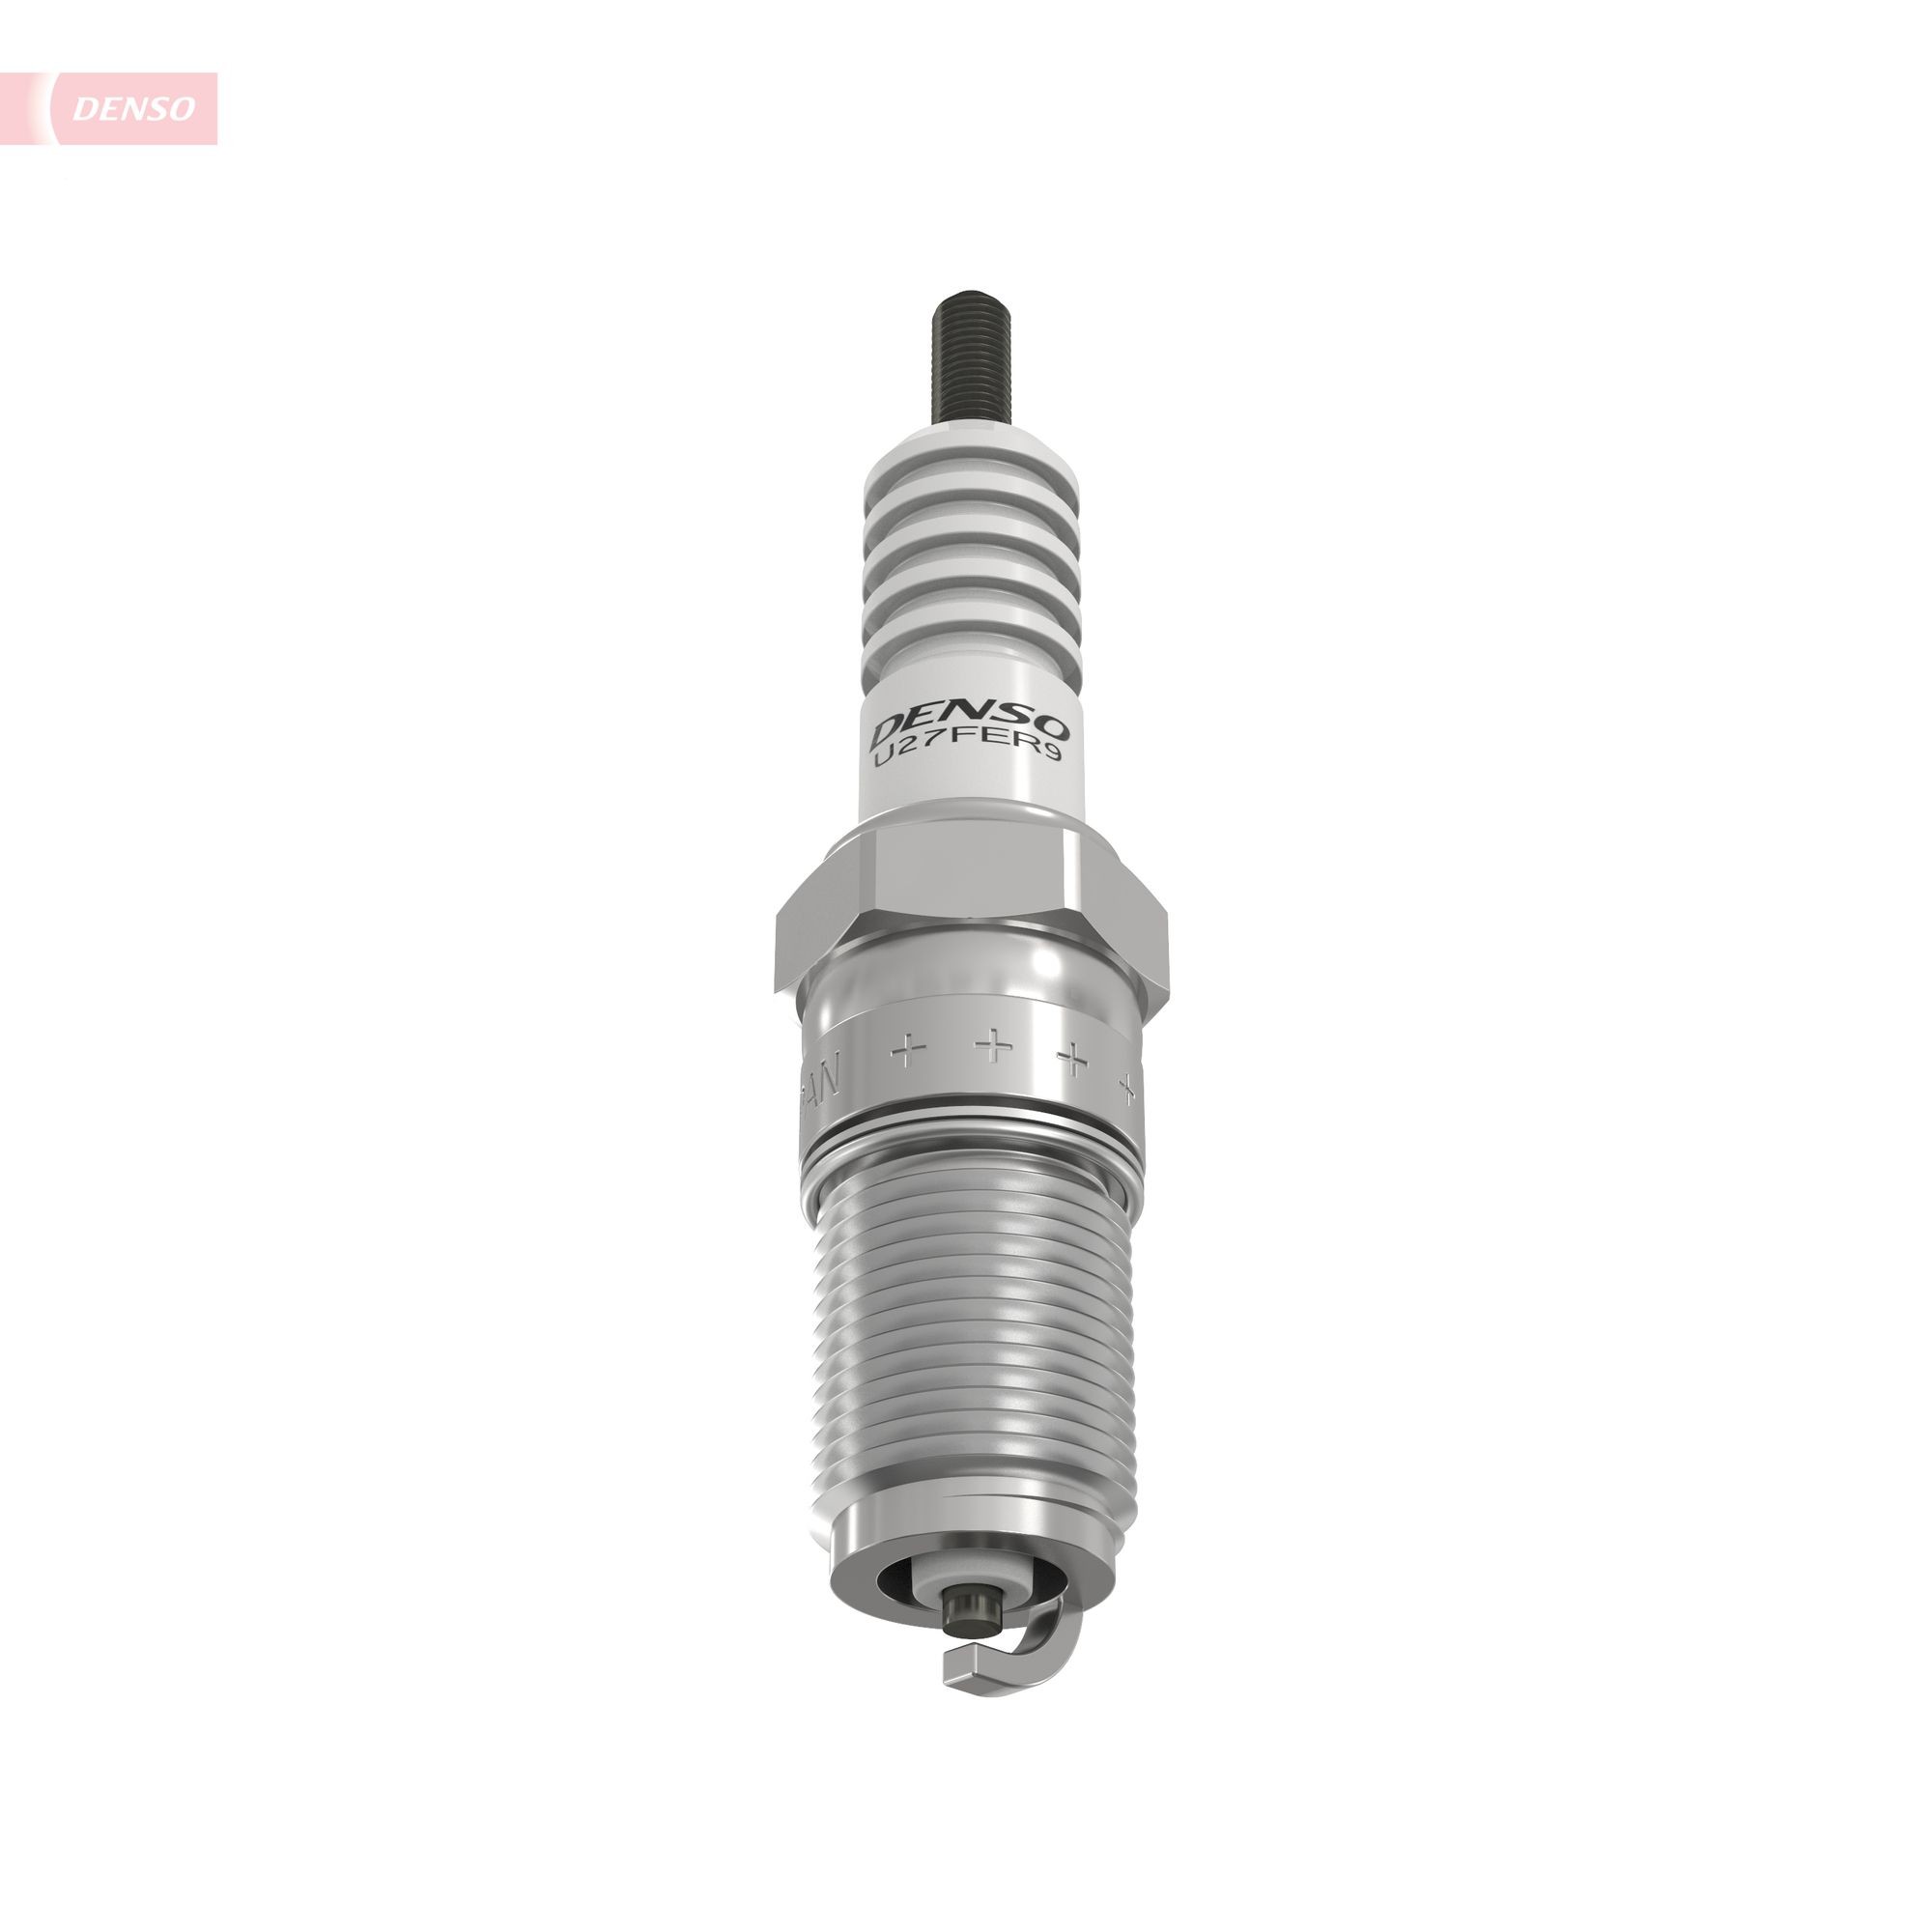 DENSO Spark plugs 4129 buy online